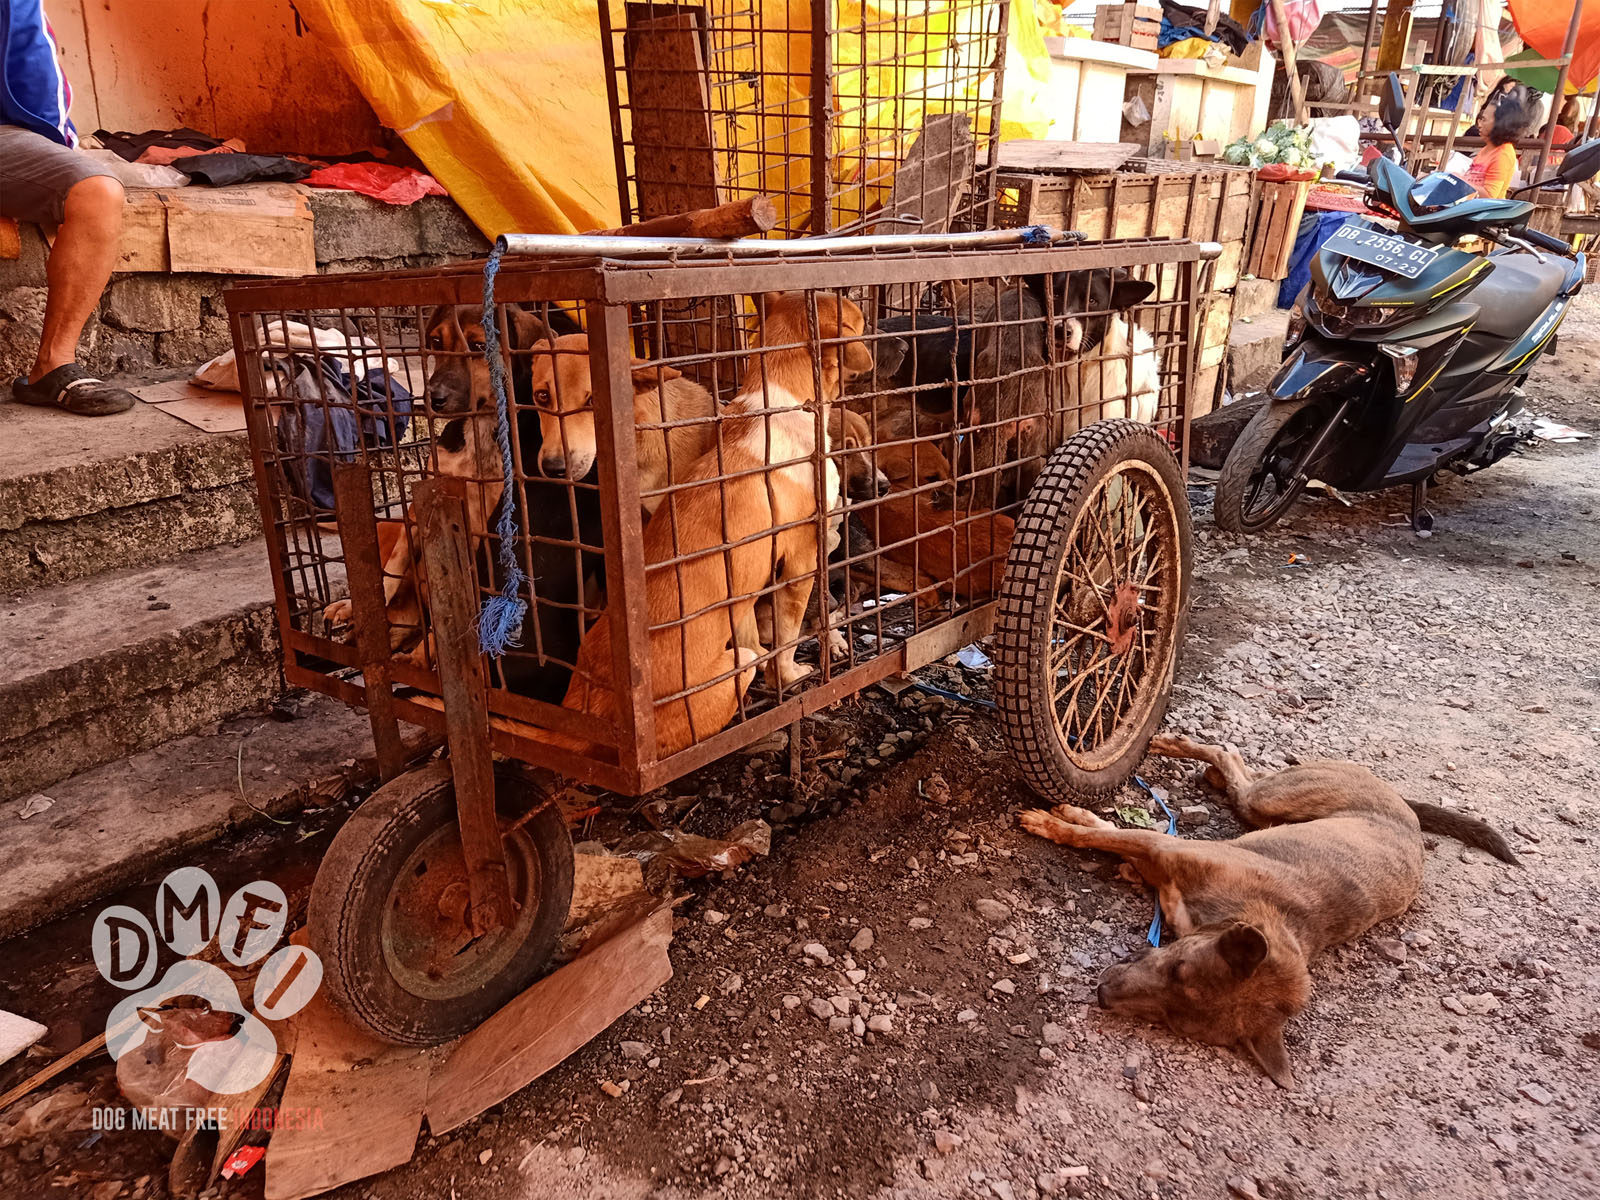 250,000 petition signatures are presented to Indonesia’s North Sulawesi Governor defying Government’s call to end the dog and cat meat trade